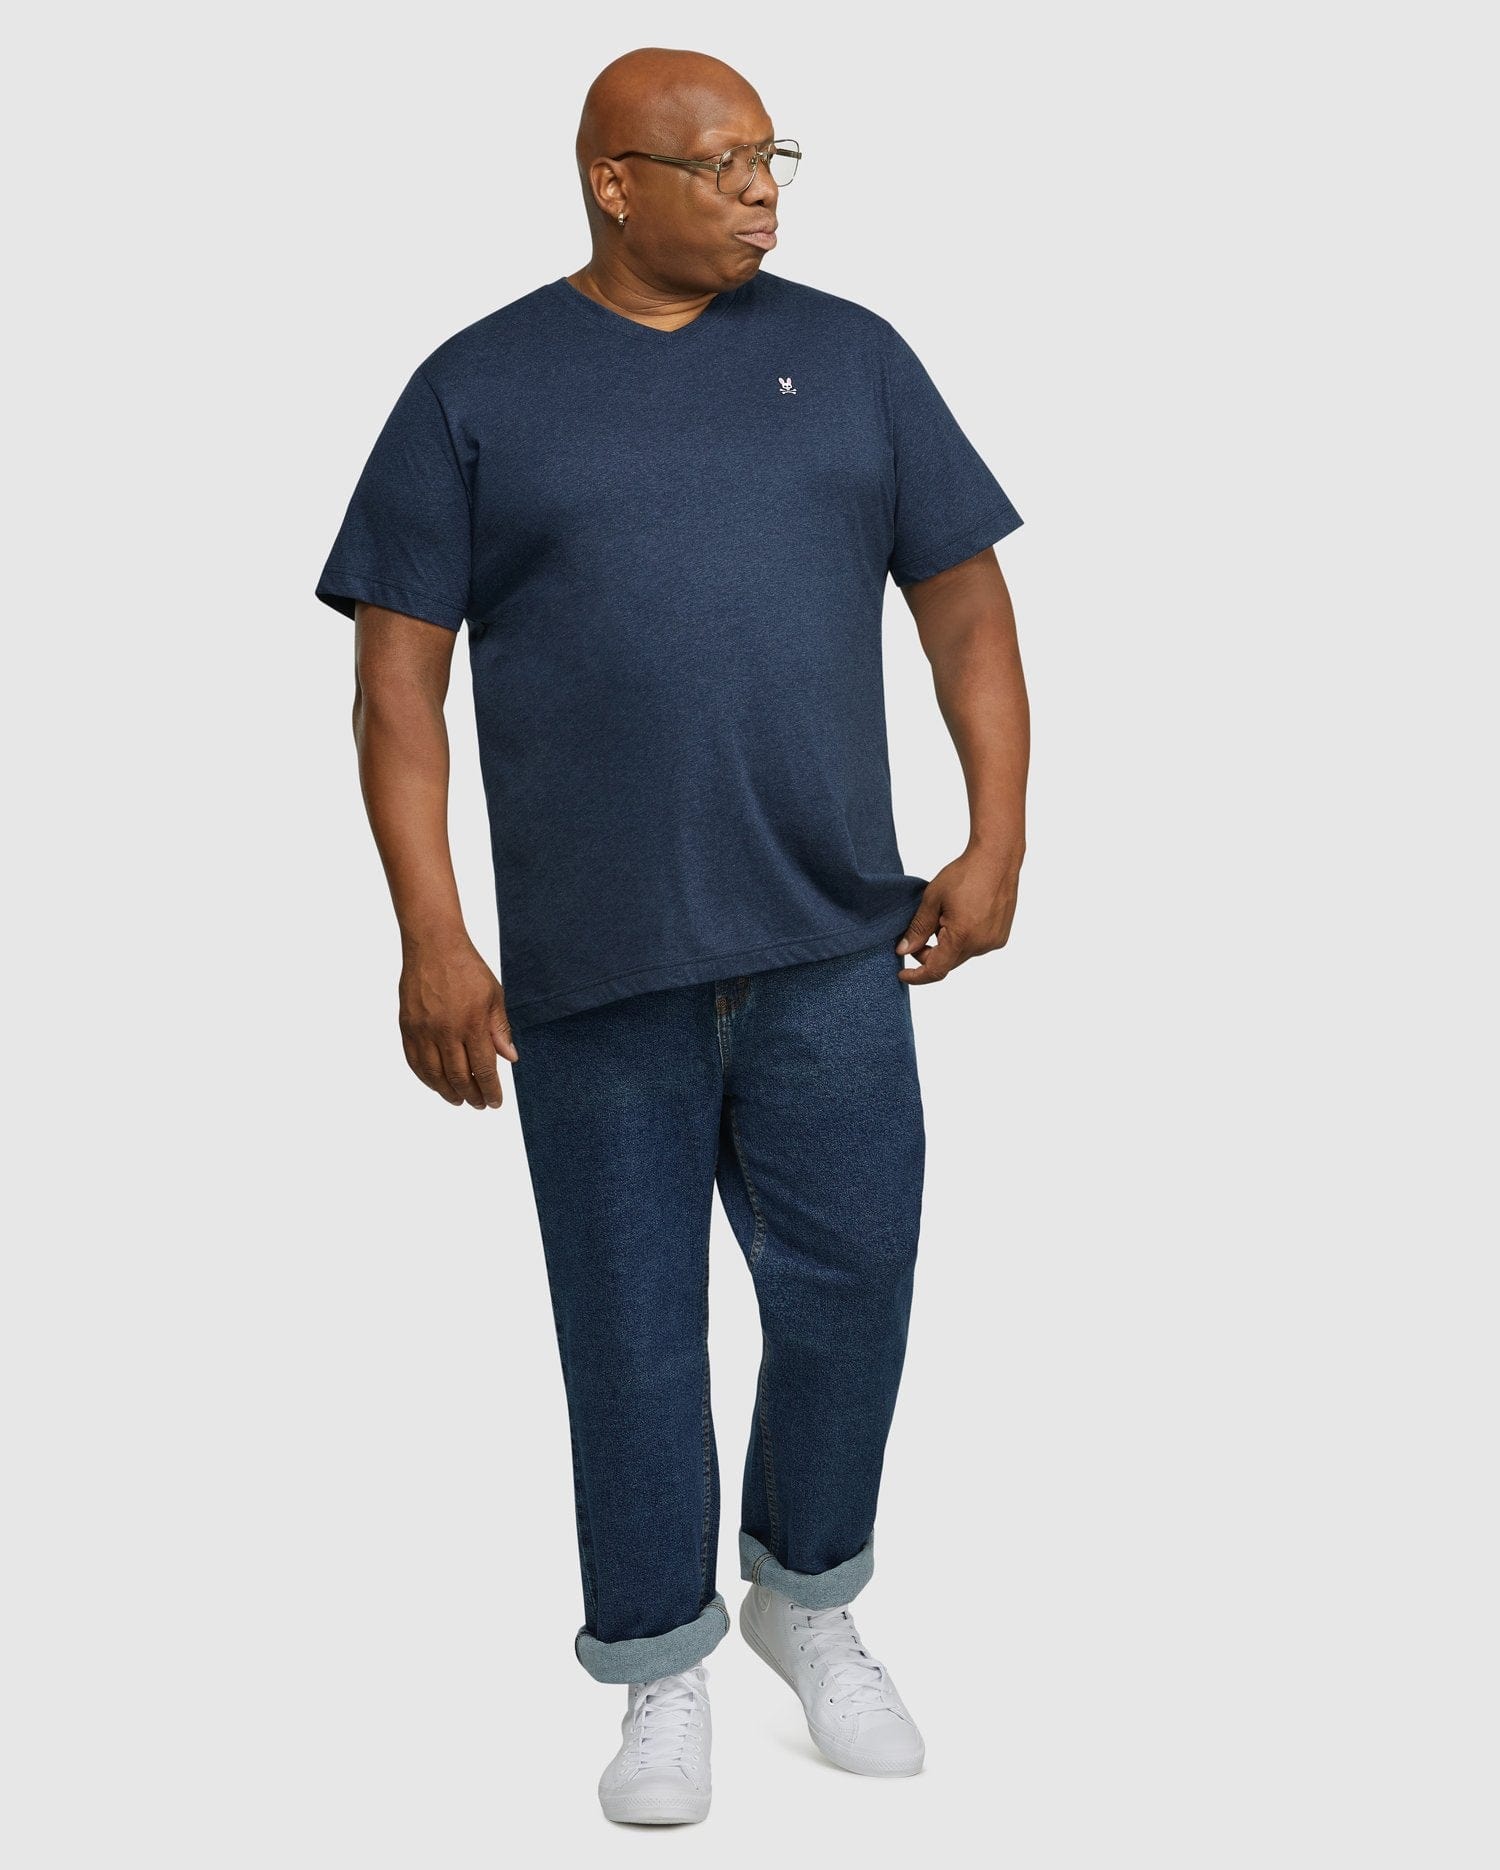 Big and Tall Classic V Neck Tee product image